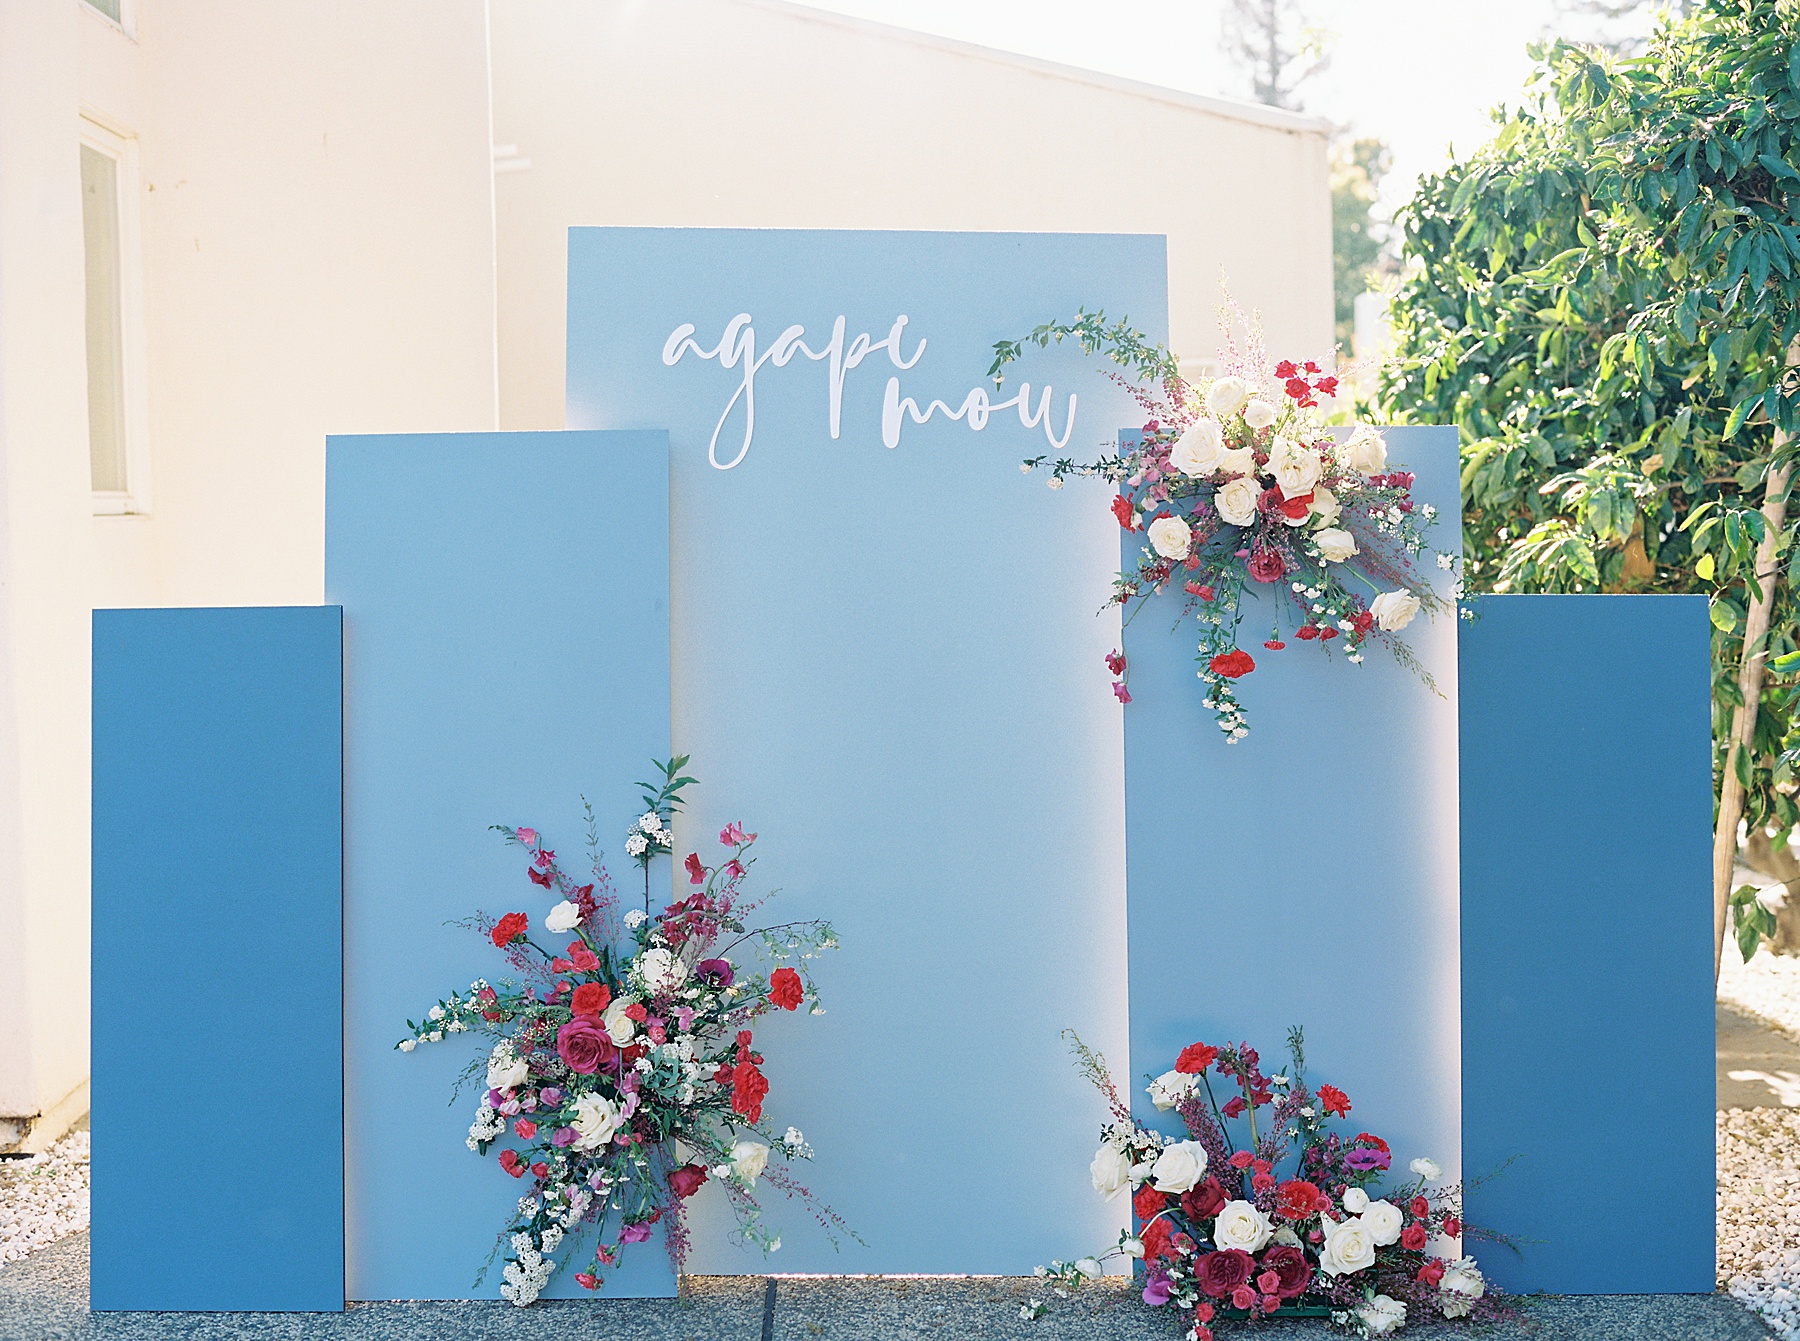 Grecian Inspired Micro-Wedding with Events by Kristina Elyse - Ash Baumgartner - Inspired by This - Sonoma Wedding Photographer_0012.jpg